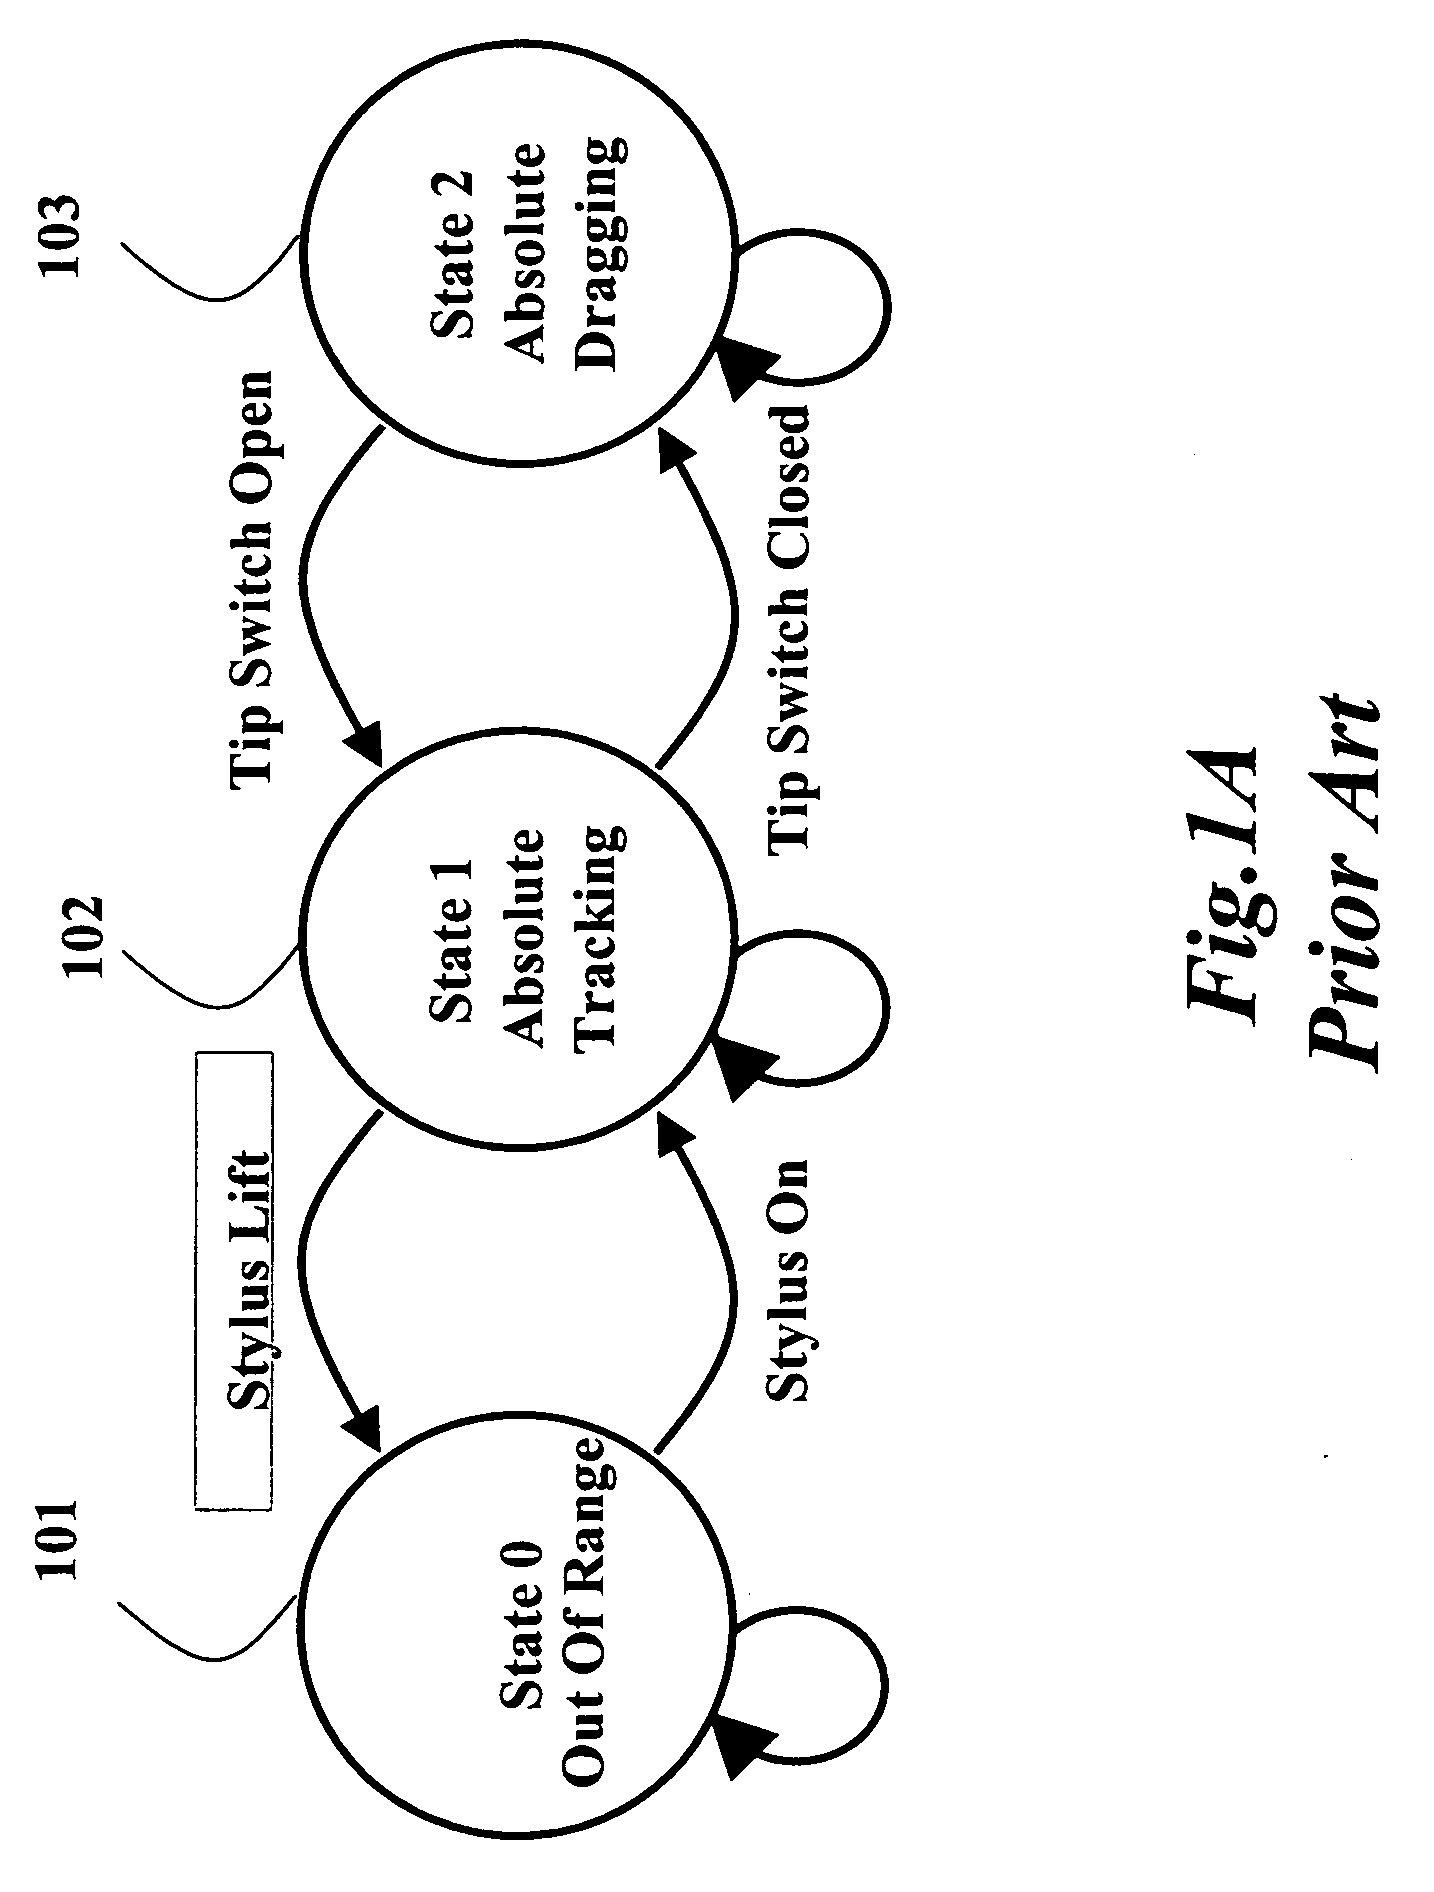 Method and system for switching between absolute and relative pointing with direct input devices